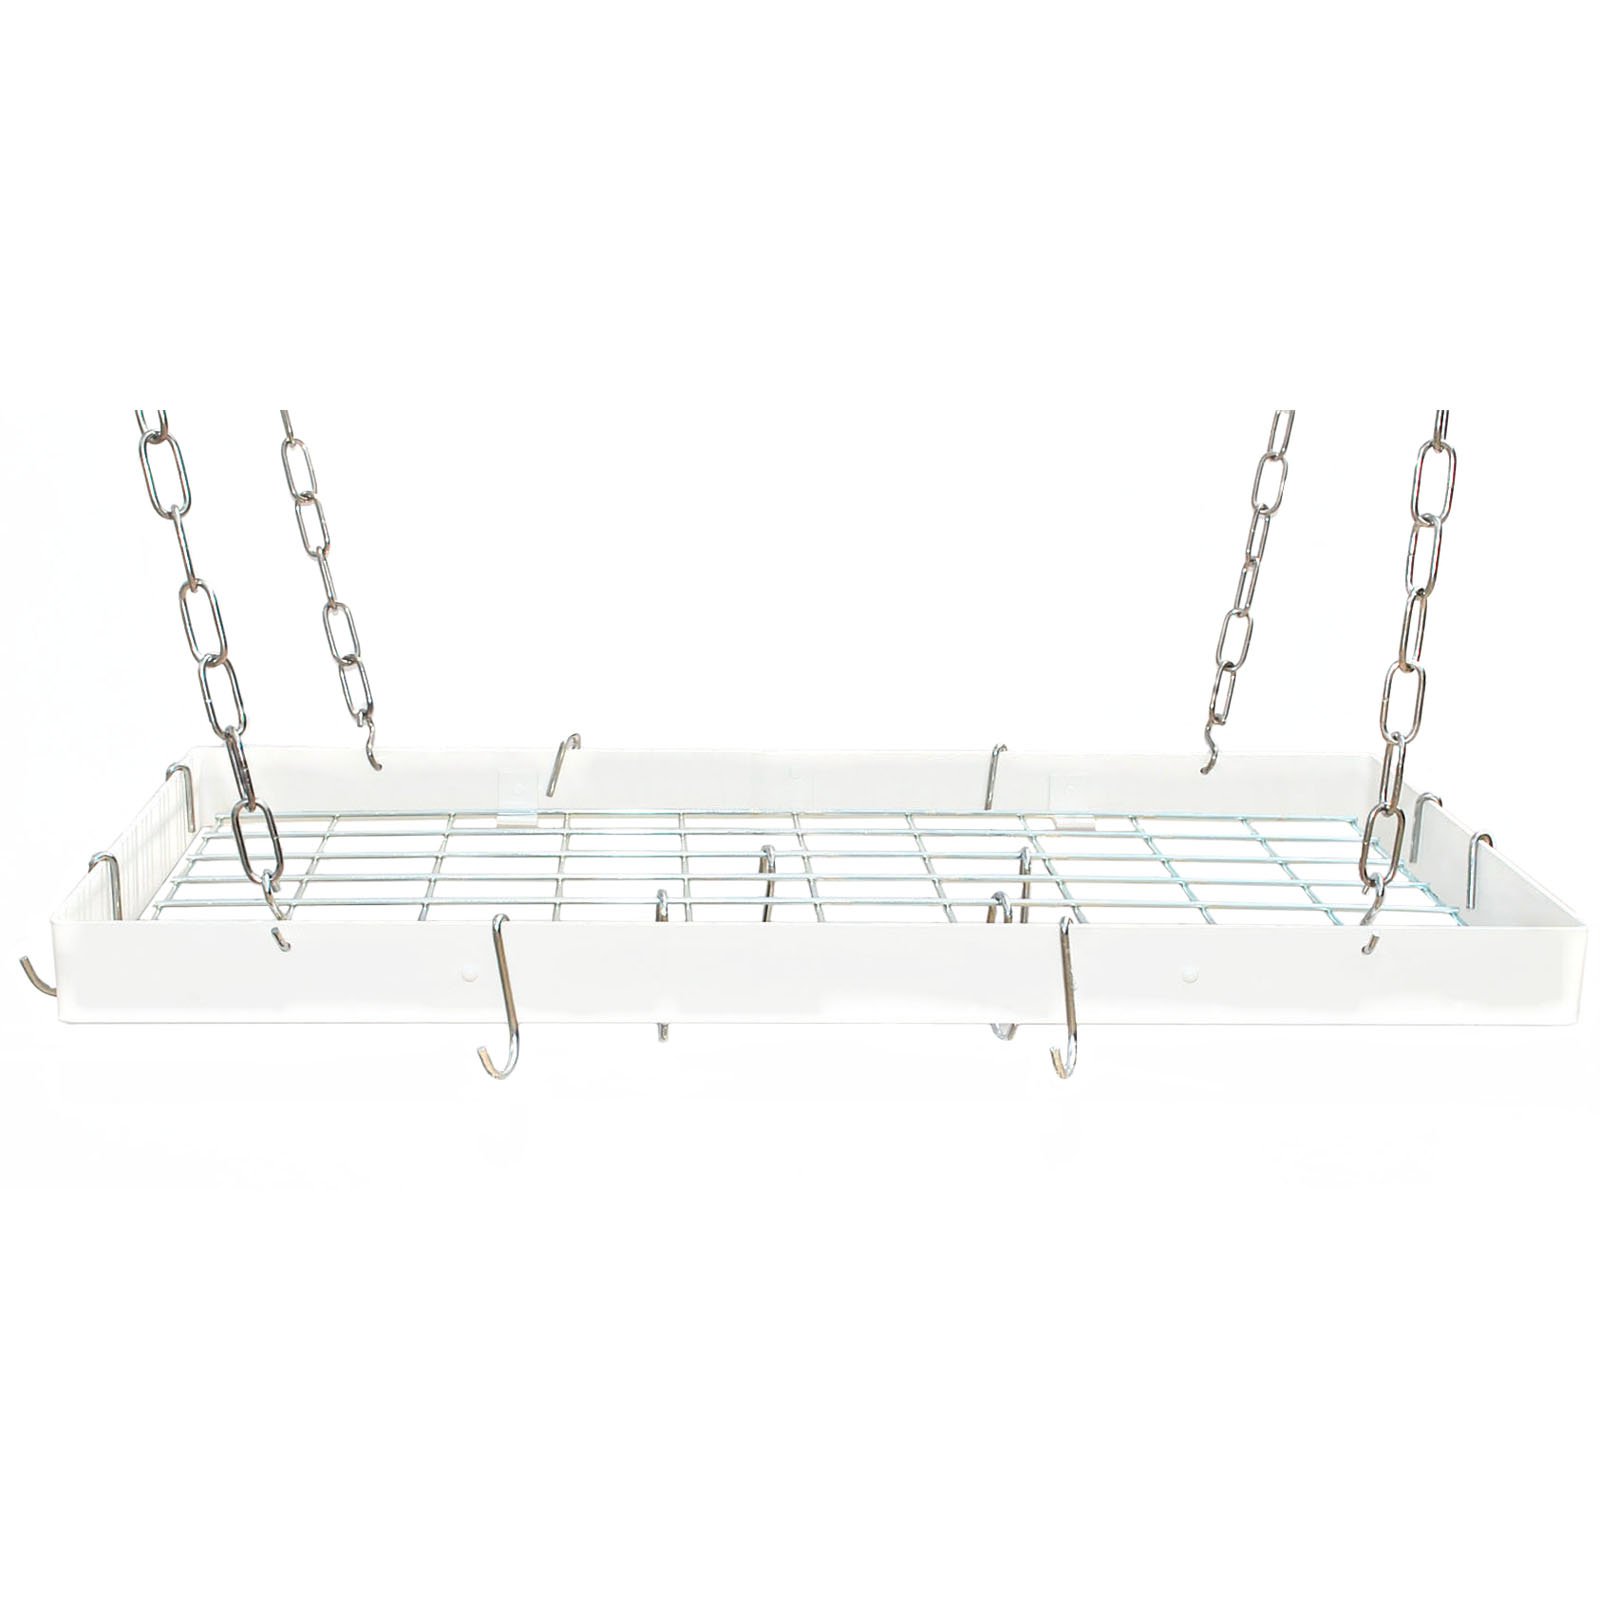 The Gourmet Rectangle Kitchen Pot Rack with Grid - image 5 of 8